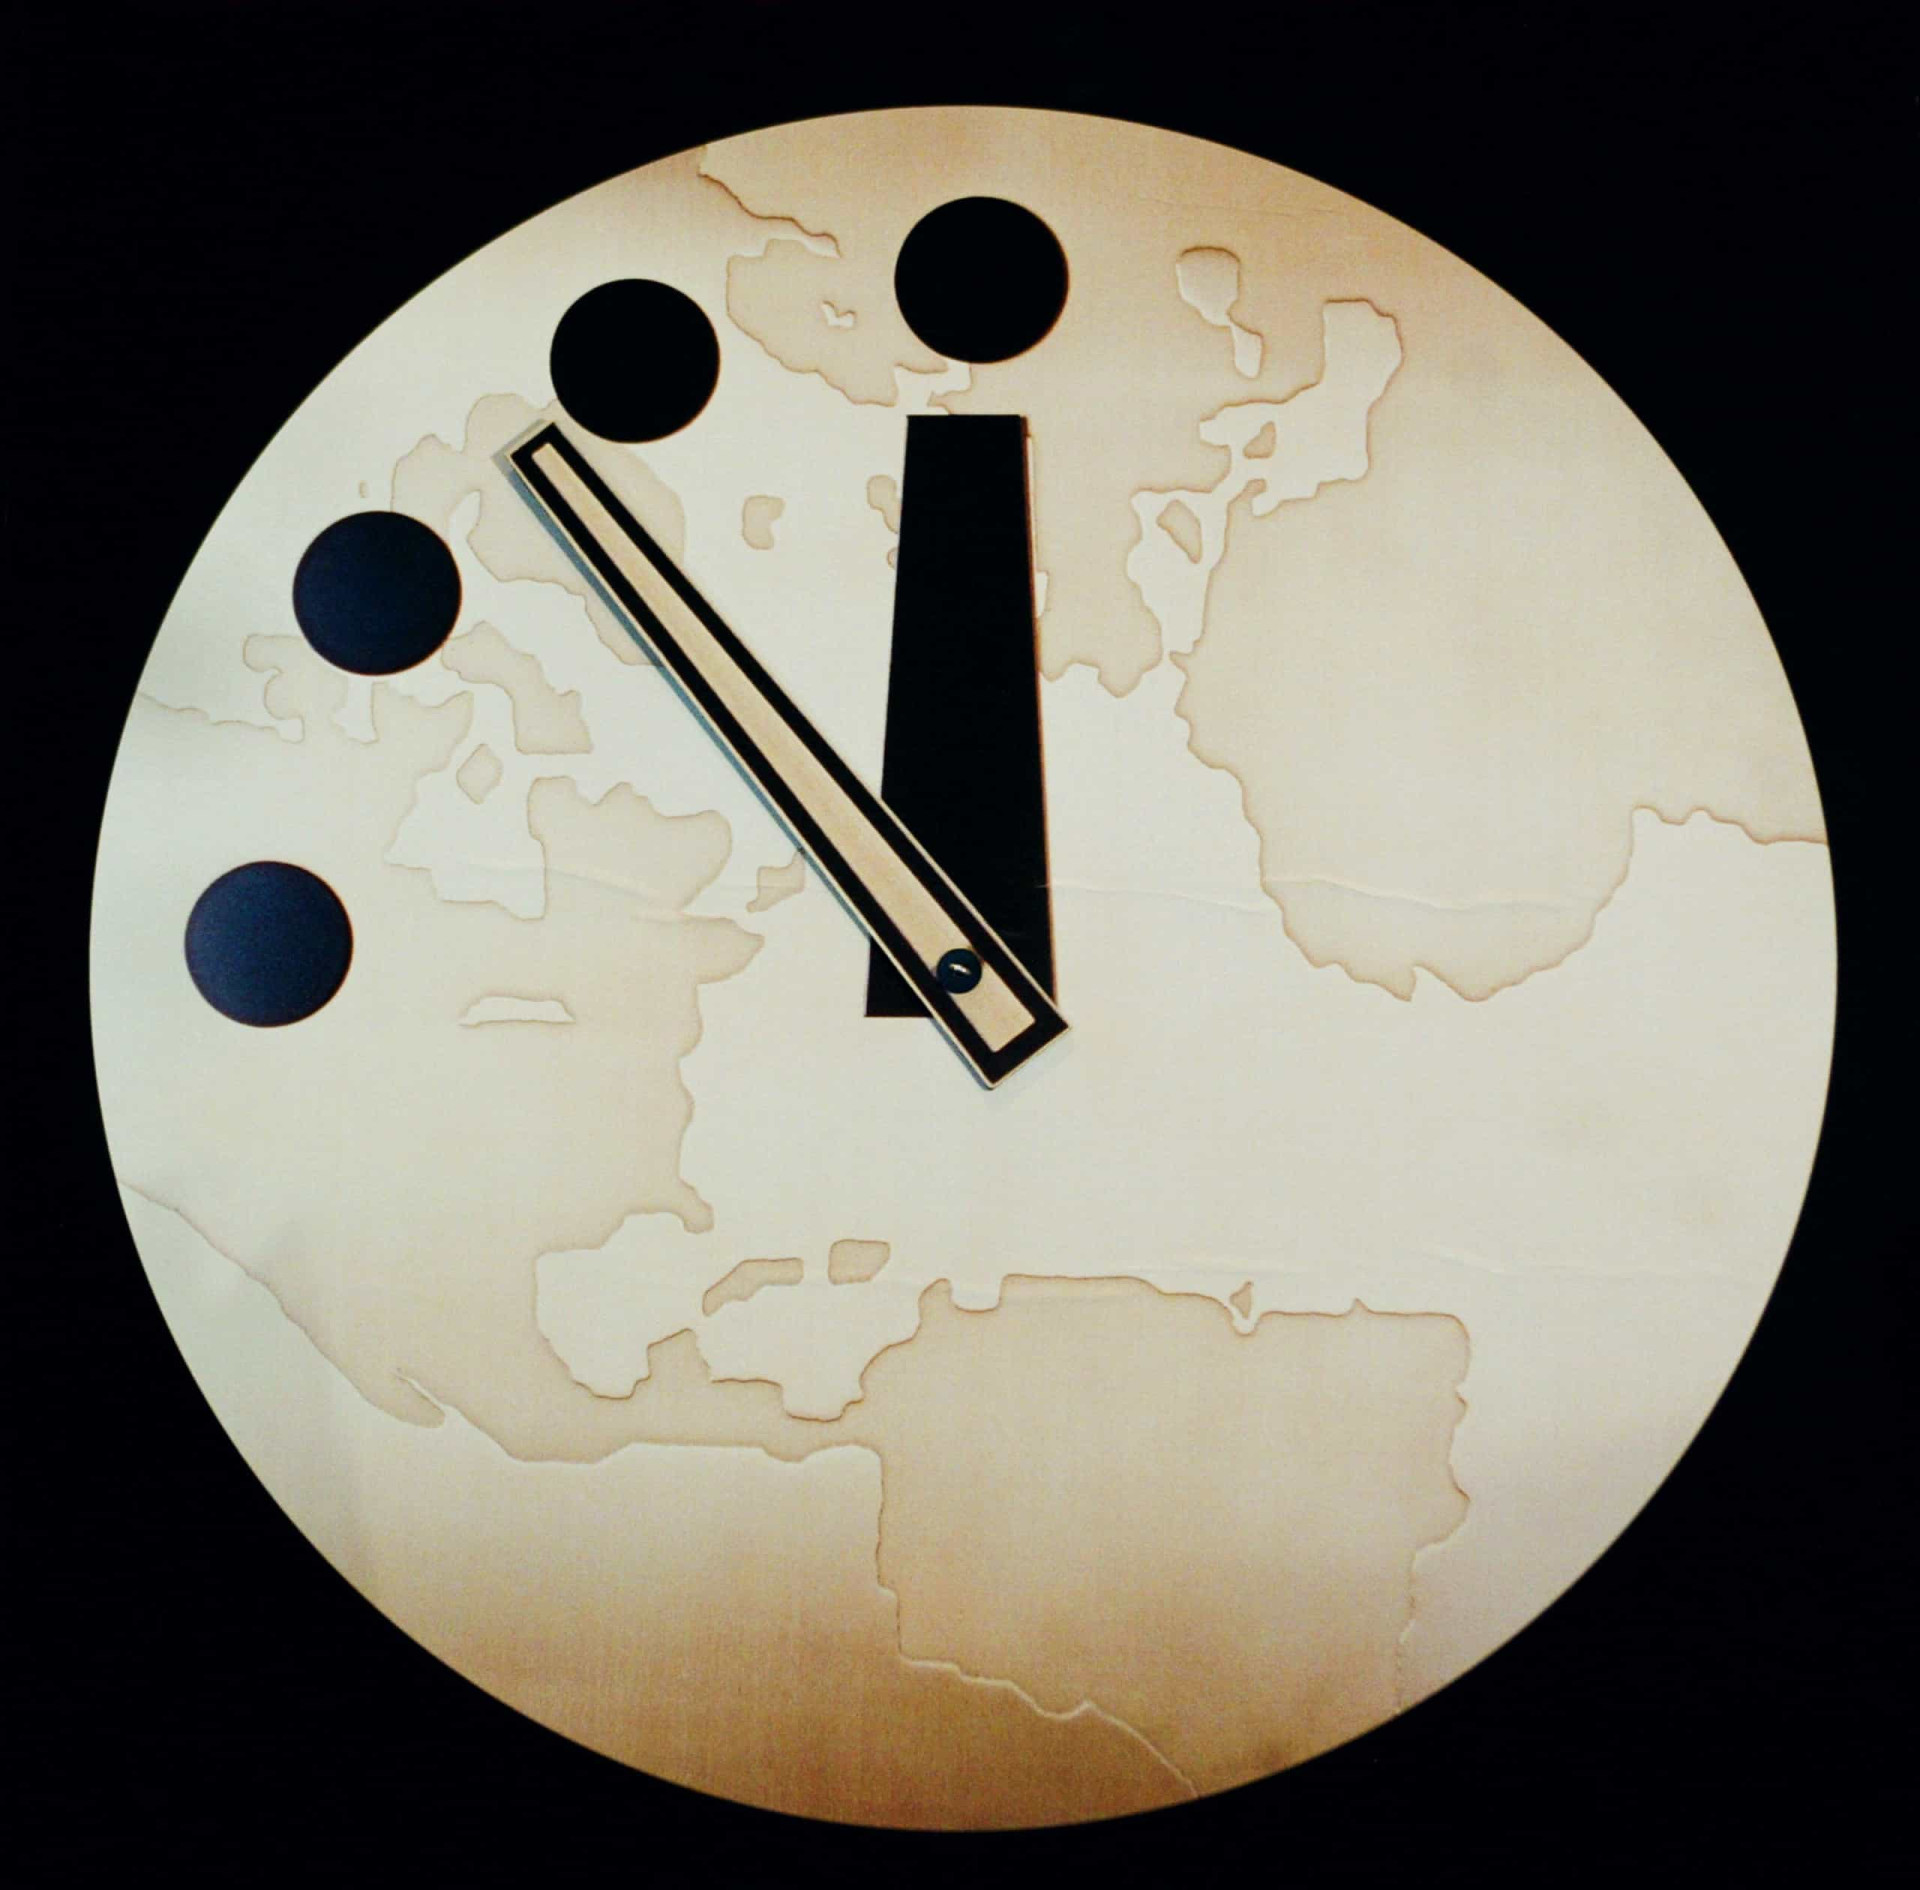 <p>The Doomsday Clock is a symbol that represents the likelihood of a man-made global catastrophe.</p><p><a href="https://www.msn.com/en-us/community/channel/vid-7xx8mnucu55yw63we9va2gwr7uihbxwc68fxqp25x6tg4ftibpra?cvid=94631541bc0f4f89bfd59158d696ad7e">Follow us and access great exclusive content every day</a></p>